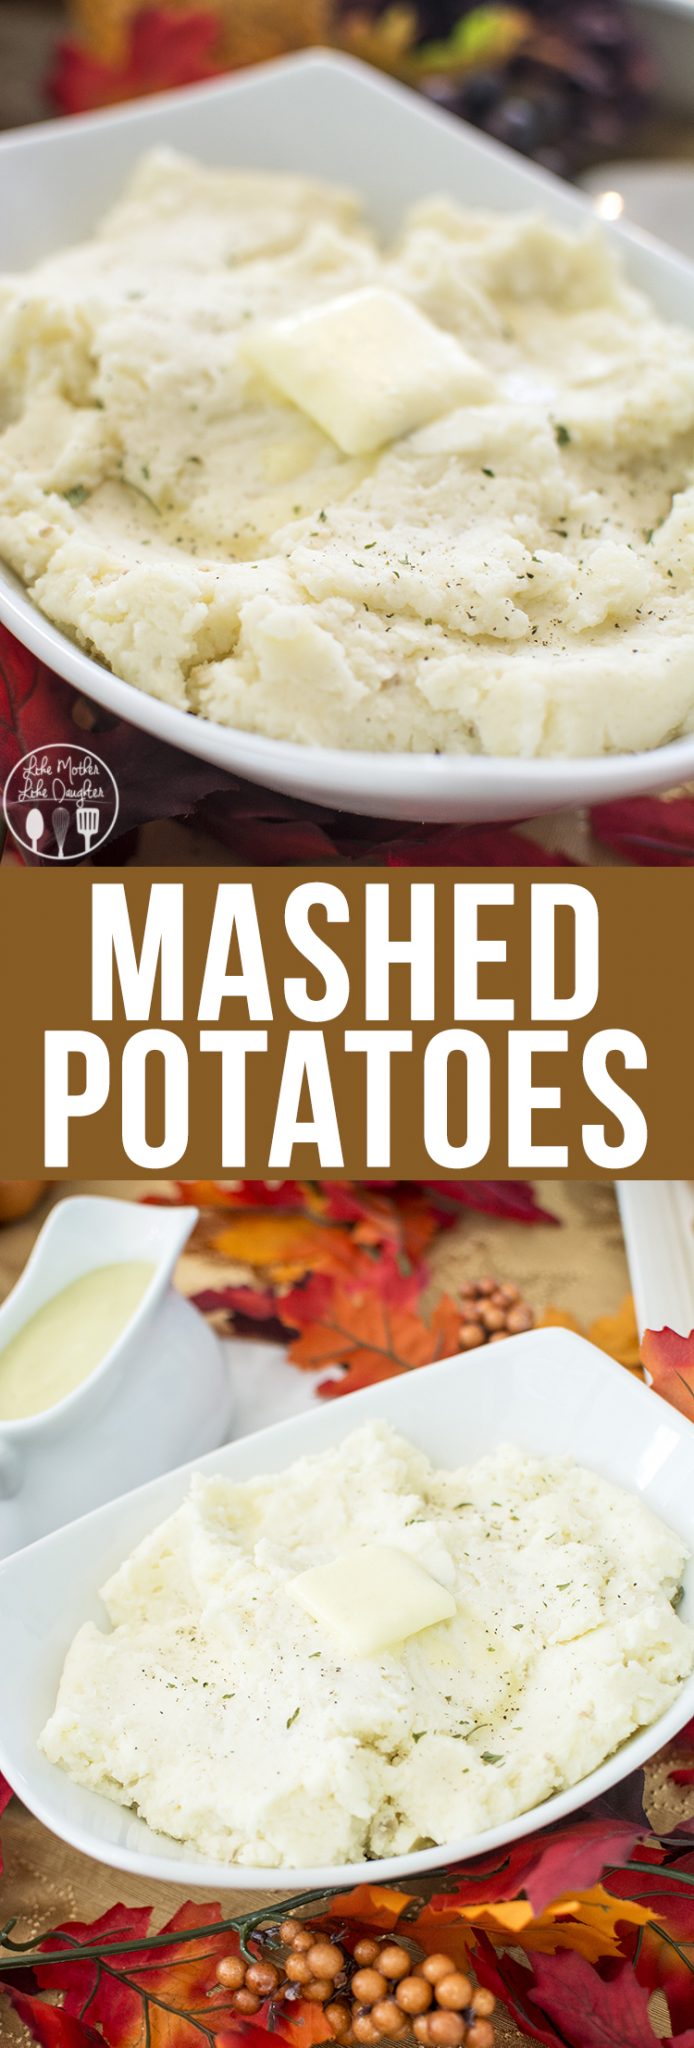 Mashed Potatoes - these mashed potatoes have great flavor, great texture and would make a perfect side dish to your Thanksgiving meal!